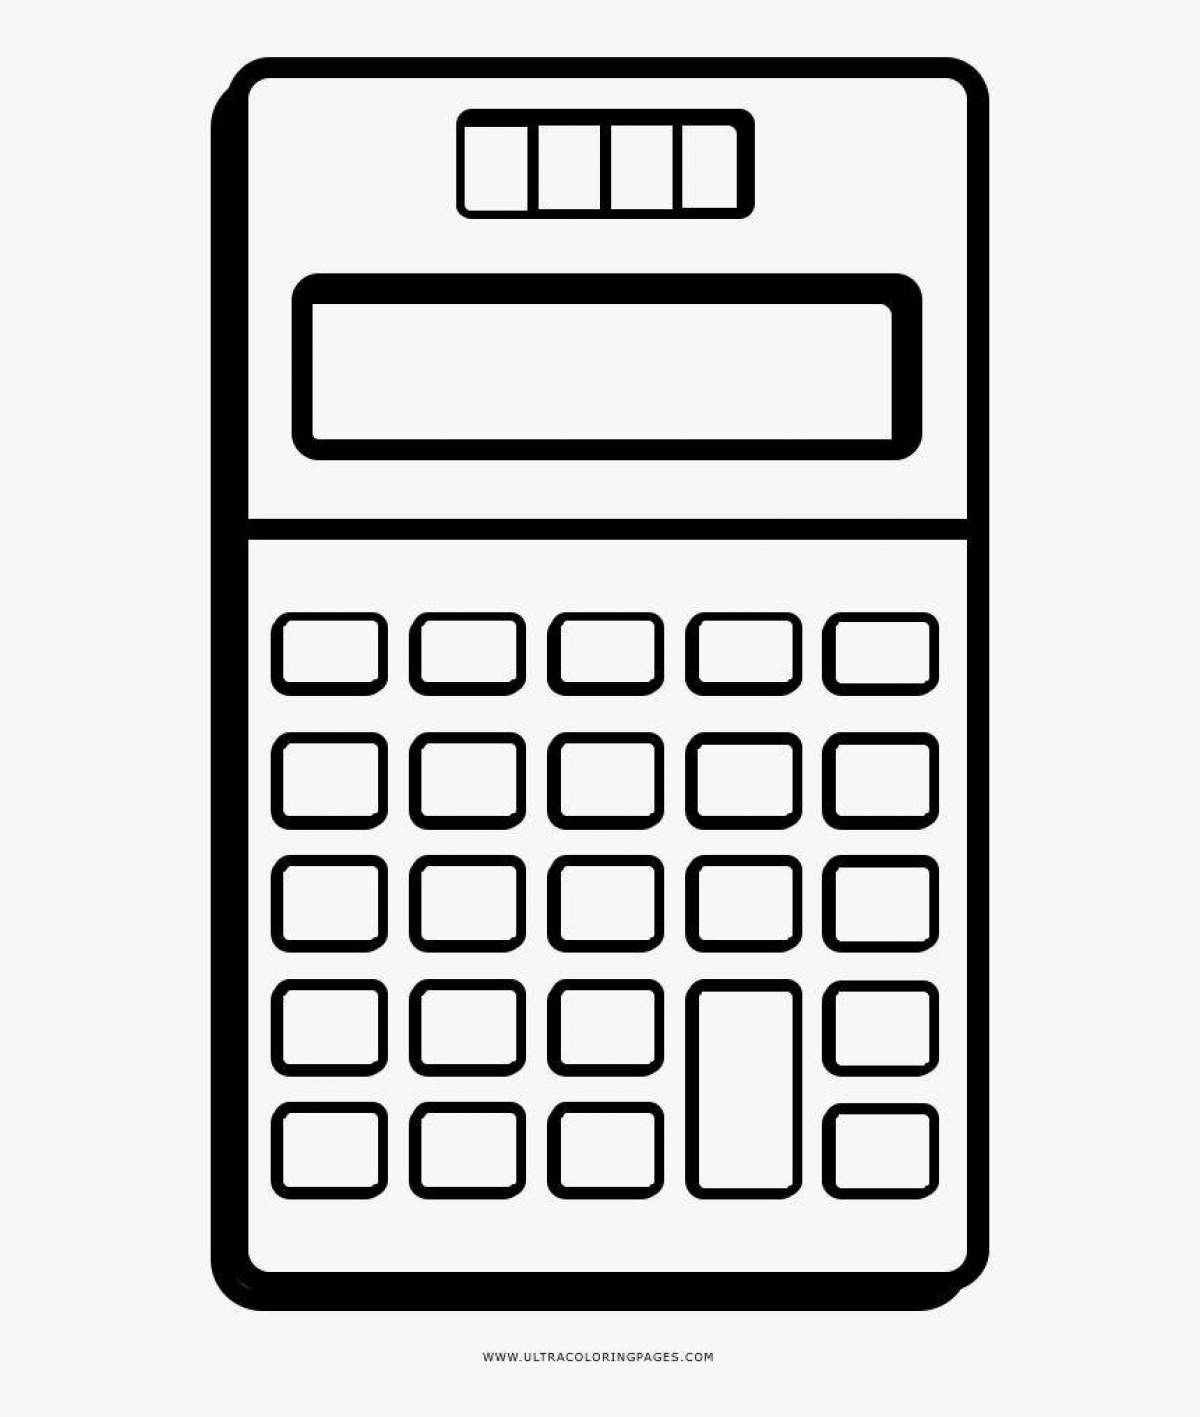 Calculator coloring page with crazy color